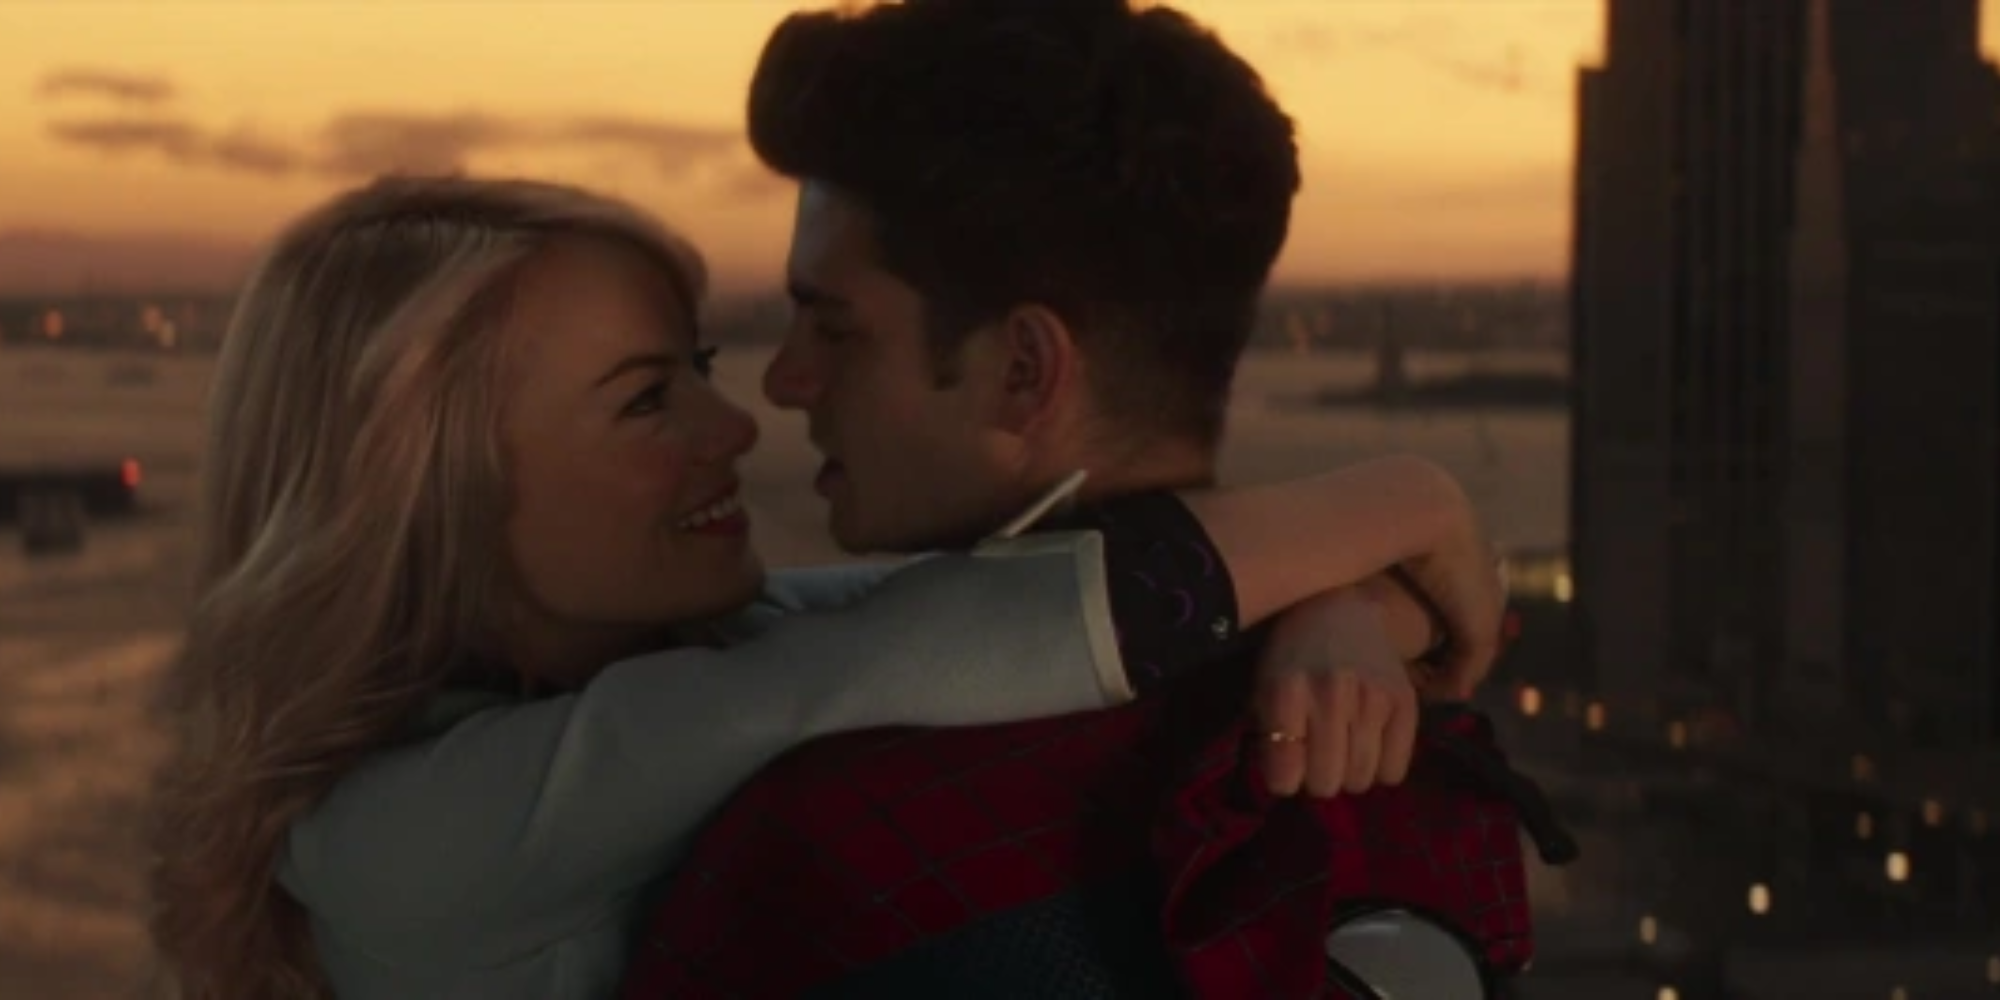 Gwen Stacy and Peter Parker hug in The Amazing Spider-Man 2.